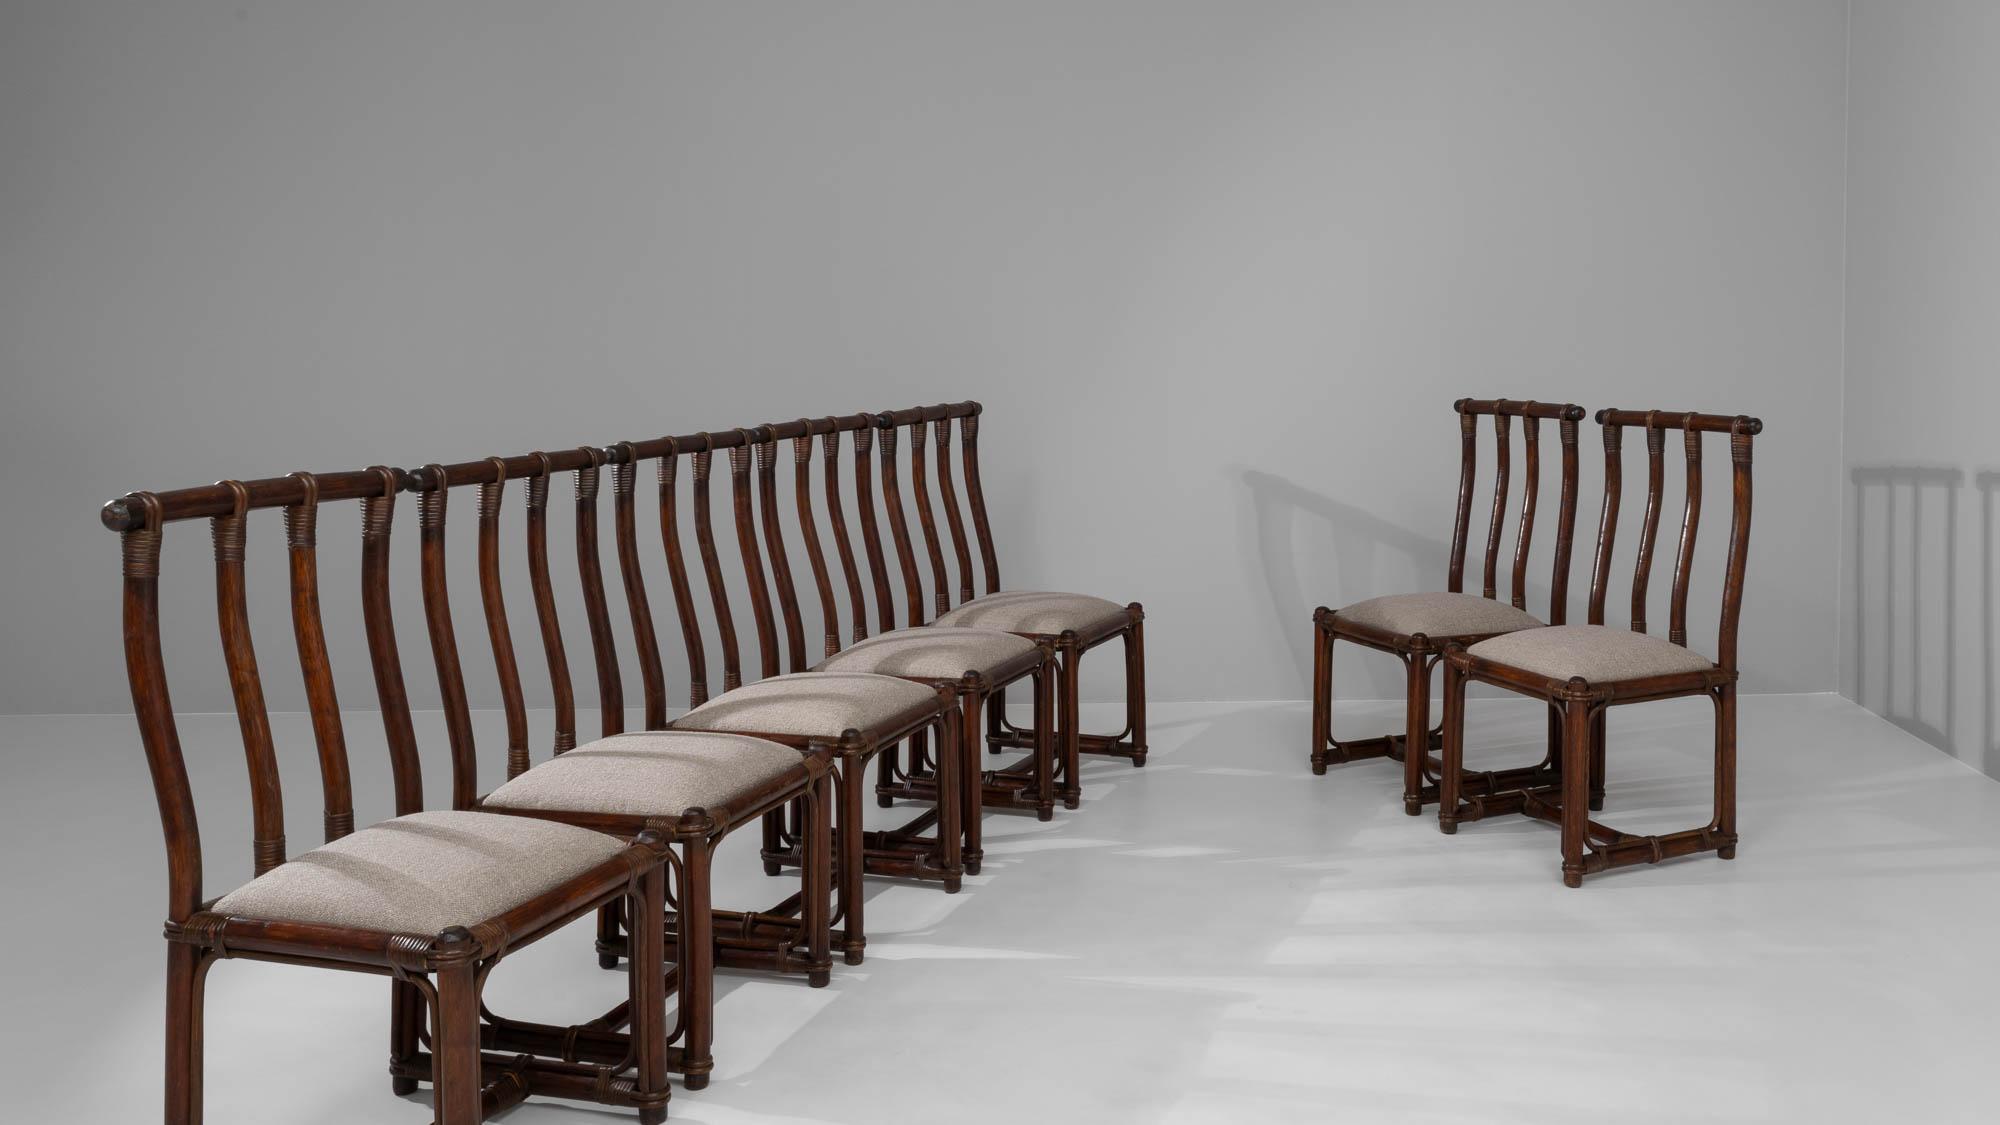 20th Century French Bamboo Dining Chairs With Upholstered Seats, Set of 7 For Sale 4